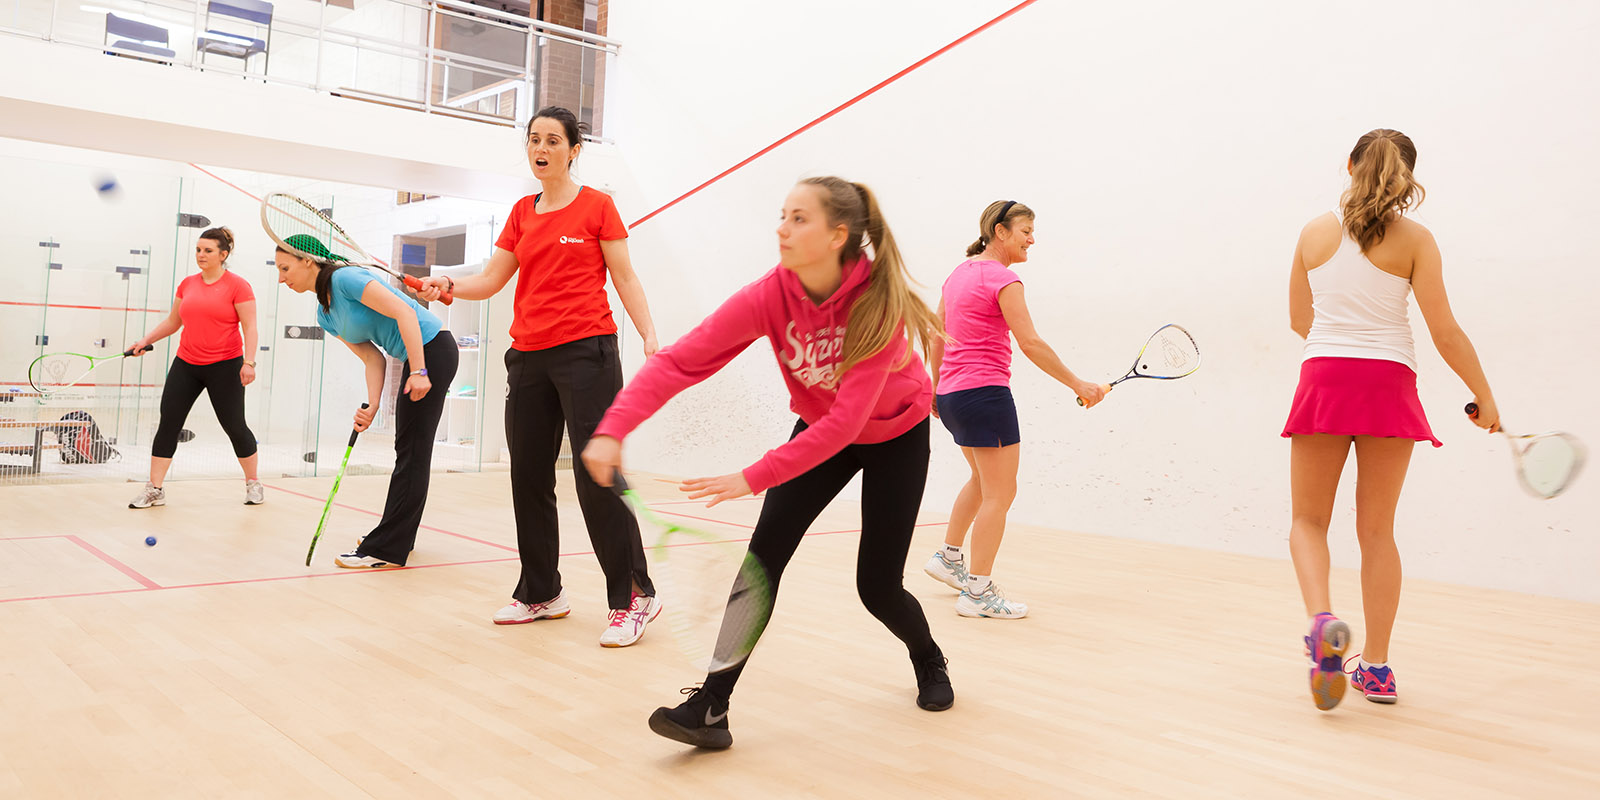 The Brooklyn community's kids squash scene is growing and making a difference.